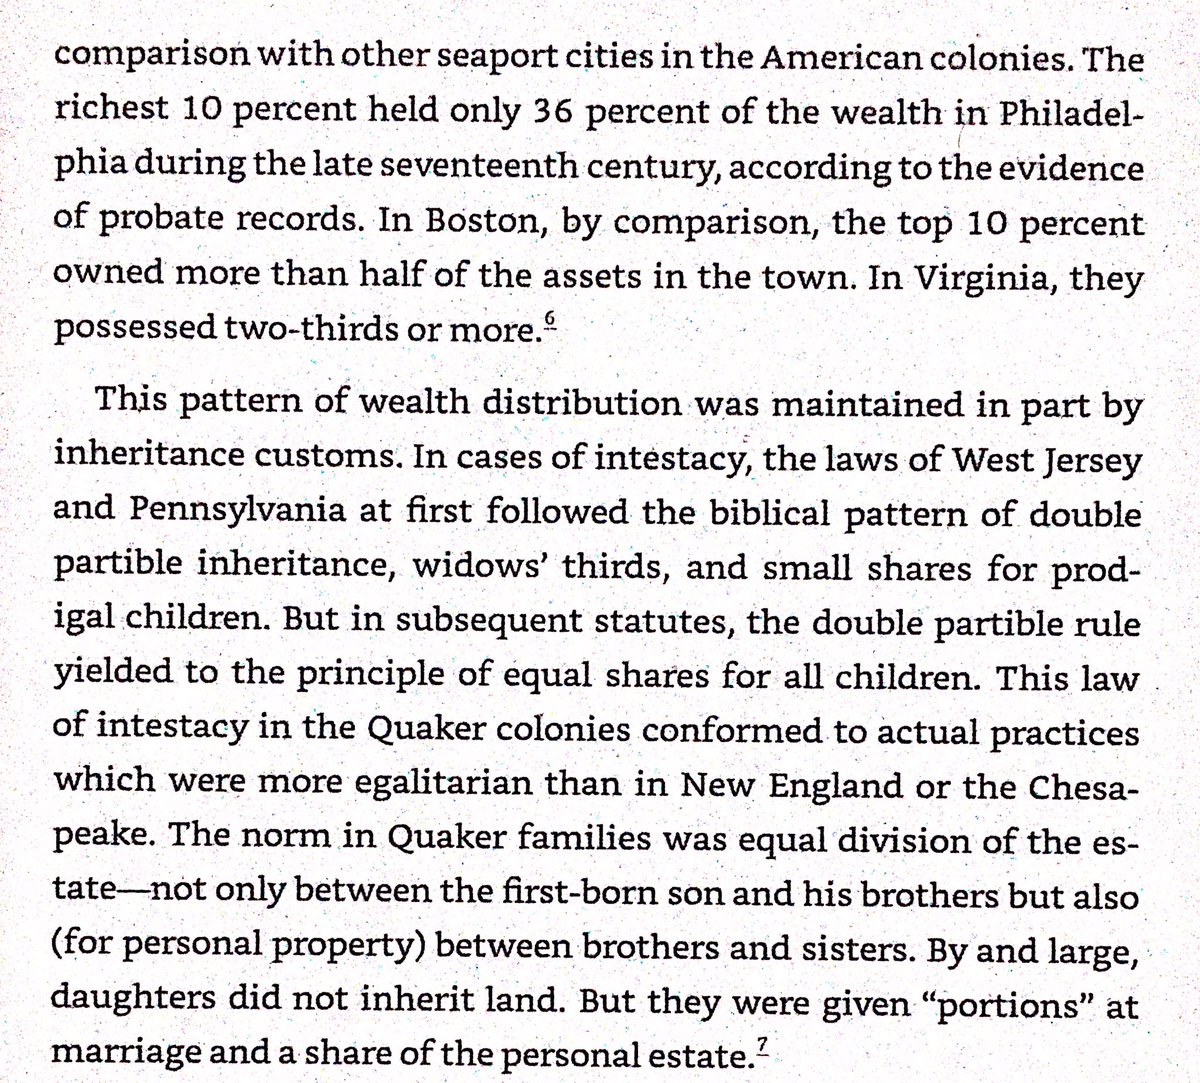 William Penn created a relatively more equal society of independent farmers by requiring residence for land ownership & dividing up large properties in West Jersey & Pennsylvania . Quaker inheritance customs helped - land was divided between all children equally.